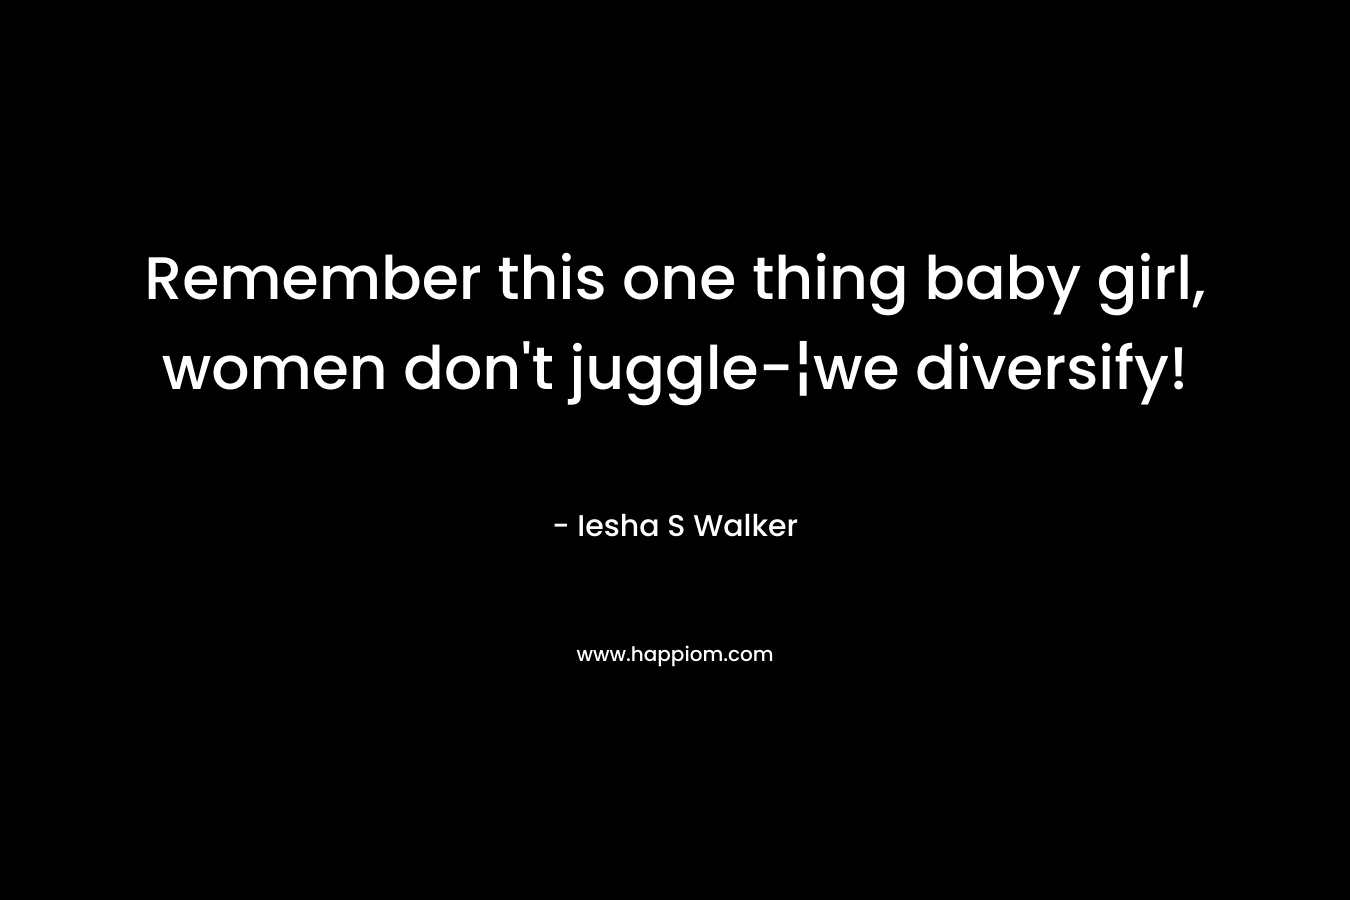 Remember this one thing baby girl, women don’t juggle-¦we diversify! – Iesha S Walker